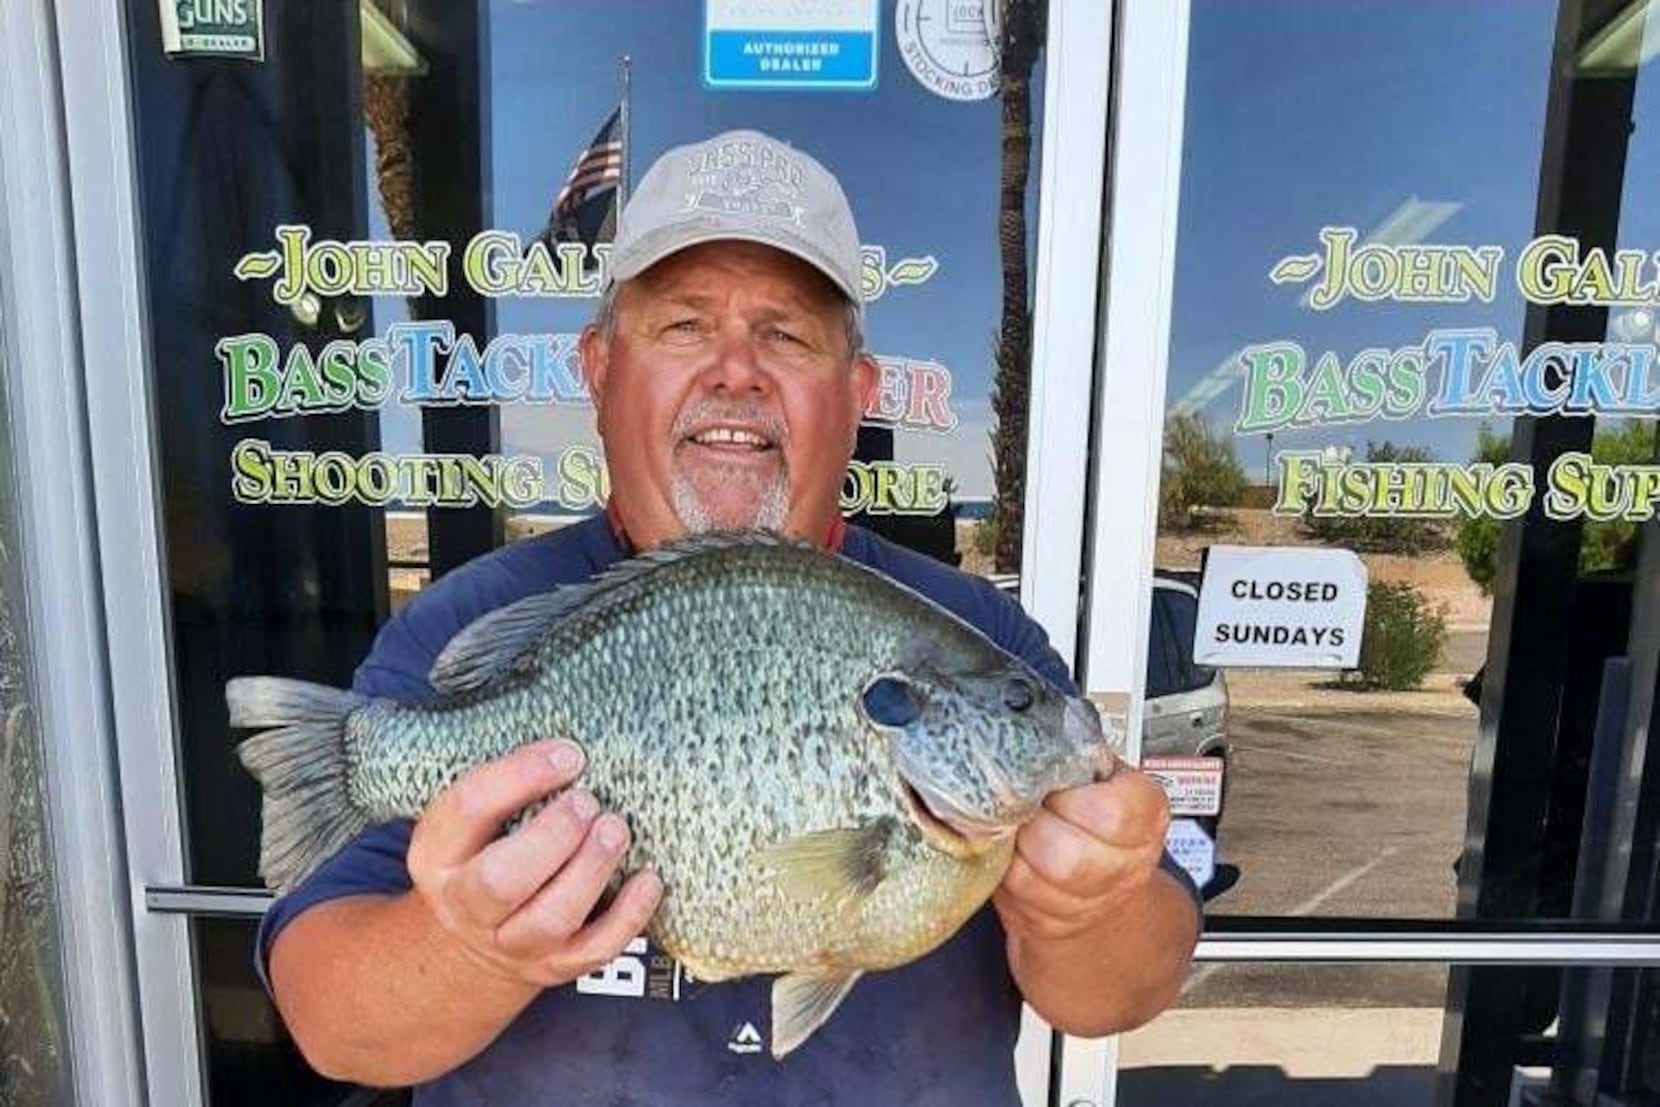 Where records flourish: Lake Havasu is the place for giant redear sunfish